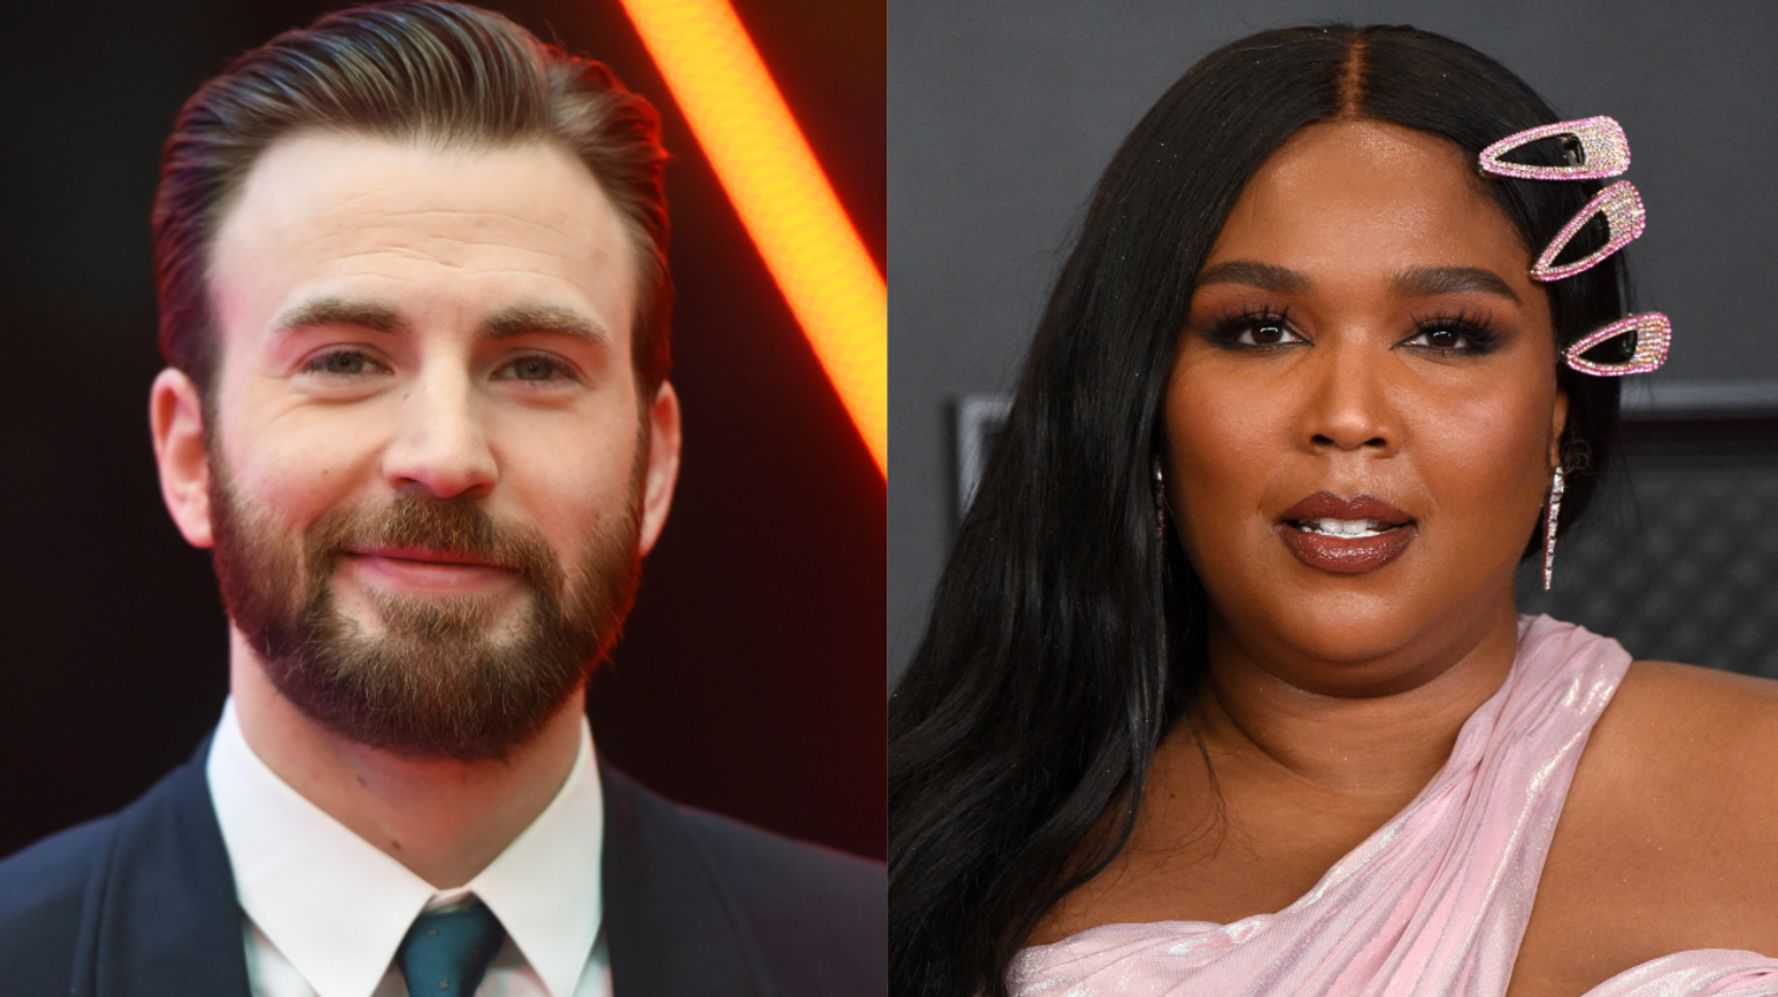 Chris Evans Slid Into Lizzo's DMs With Response To Her Joking About Having His Baby